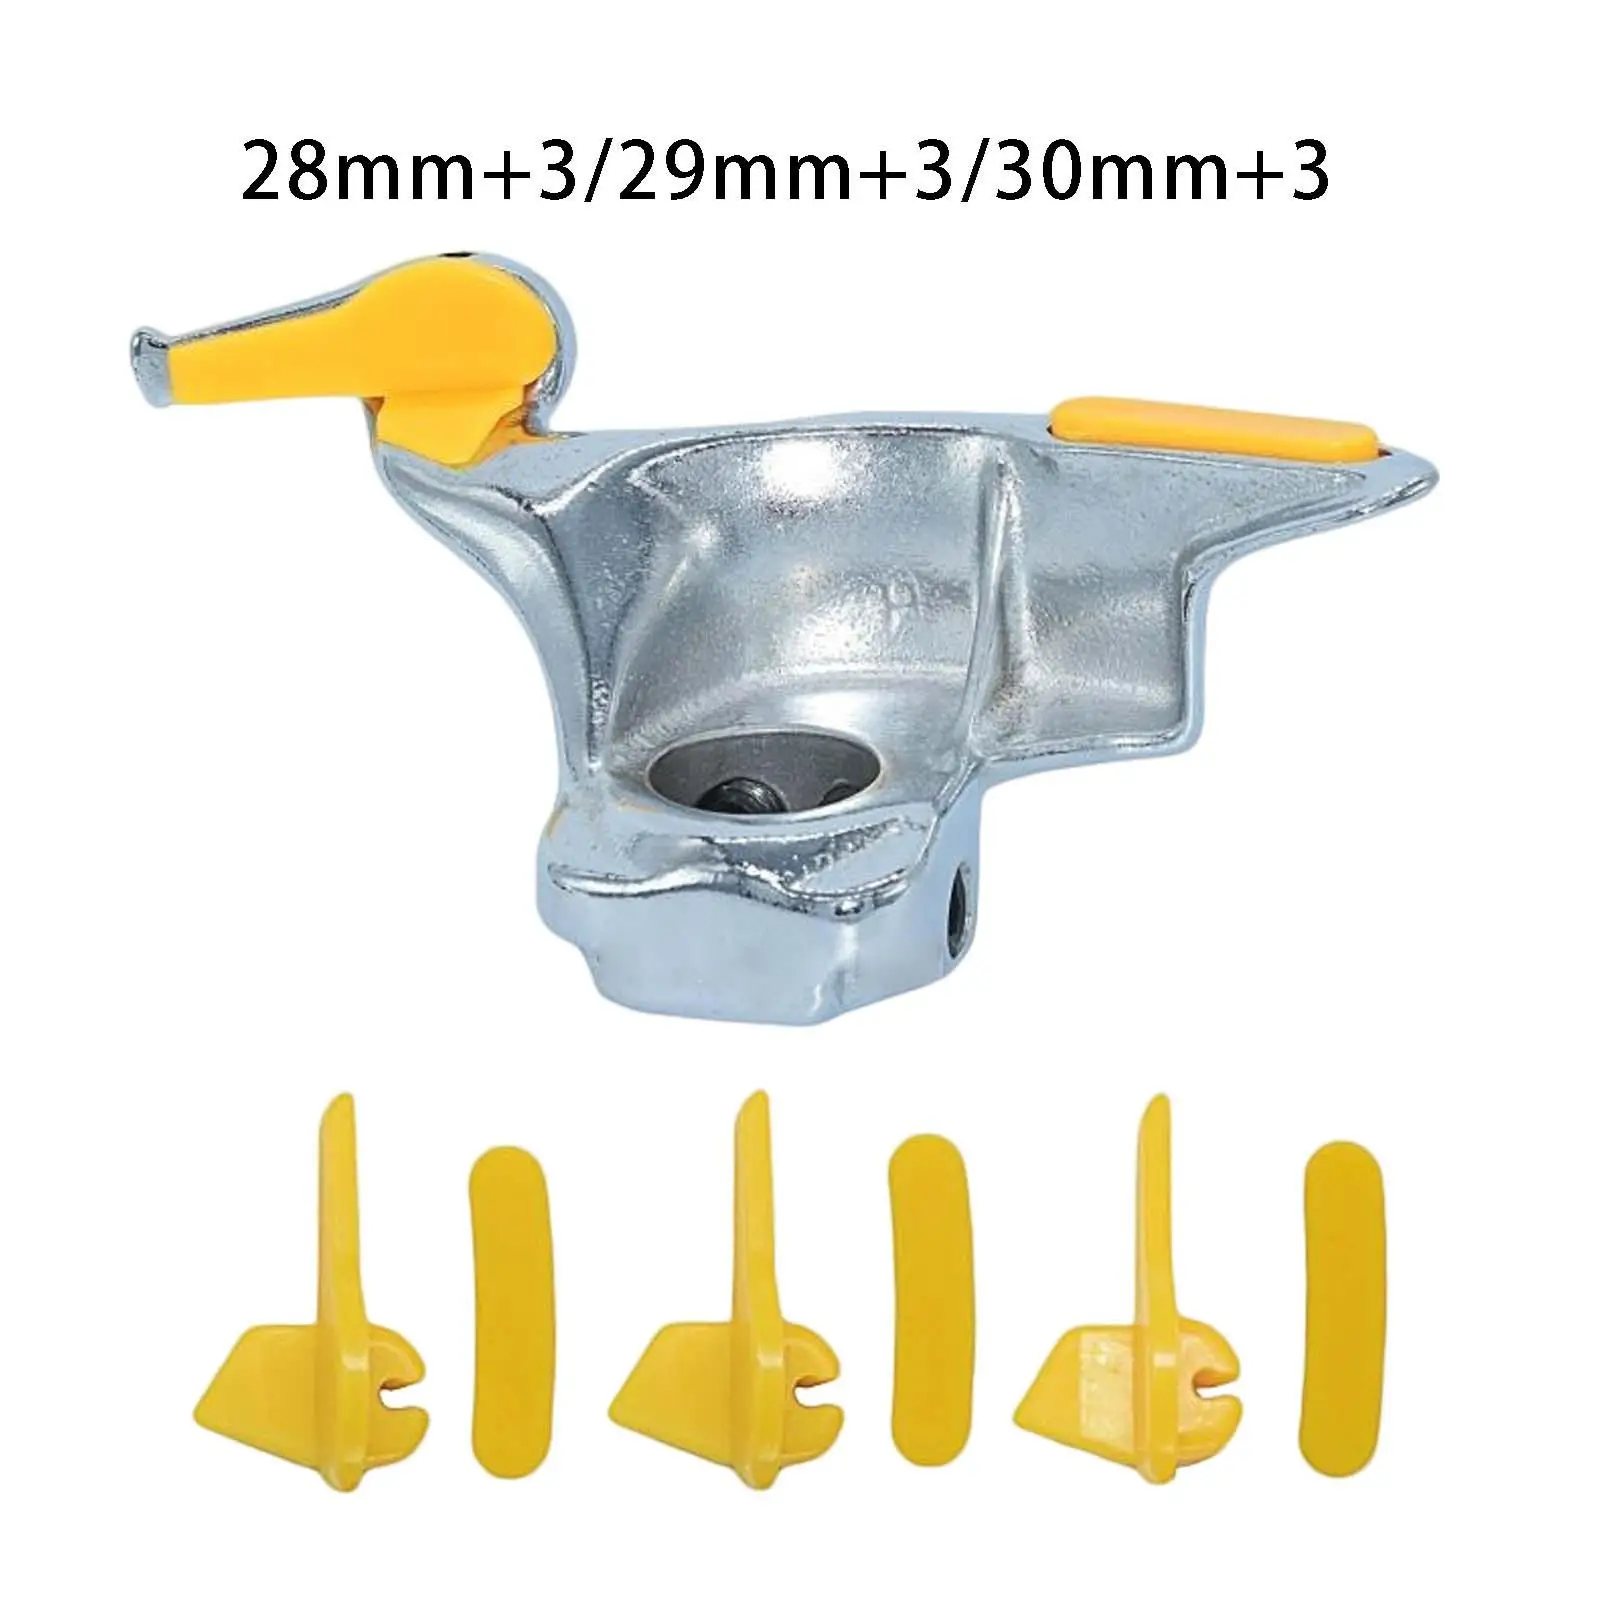 Tyre Changer Mount Demount Duck Head Durable Replacement with Rim Protector Tool